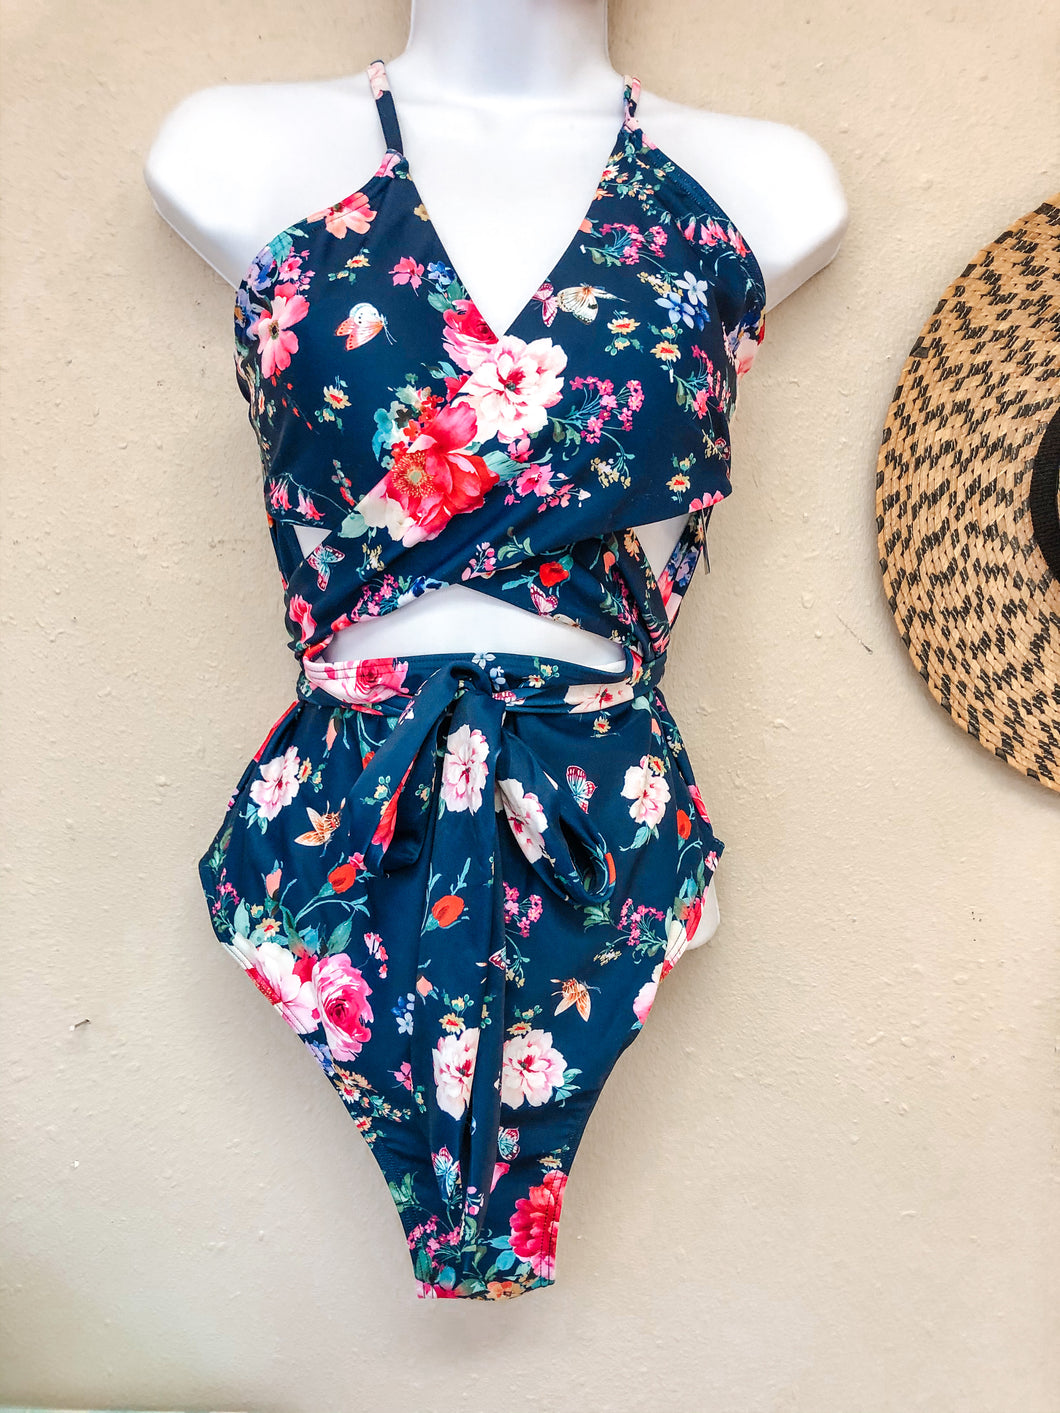 Floral Monokini Swimsuit - Wildfire and Lace